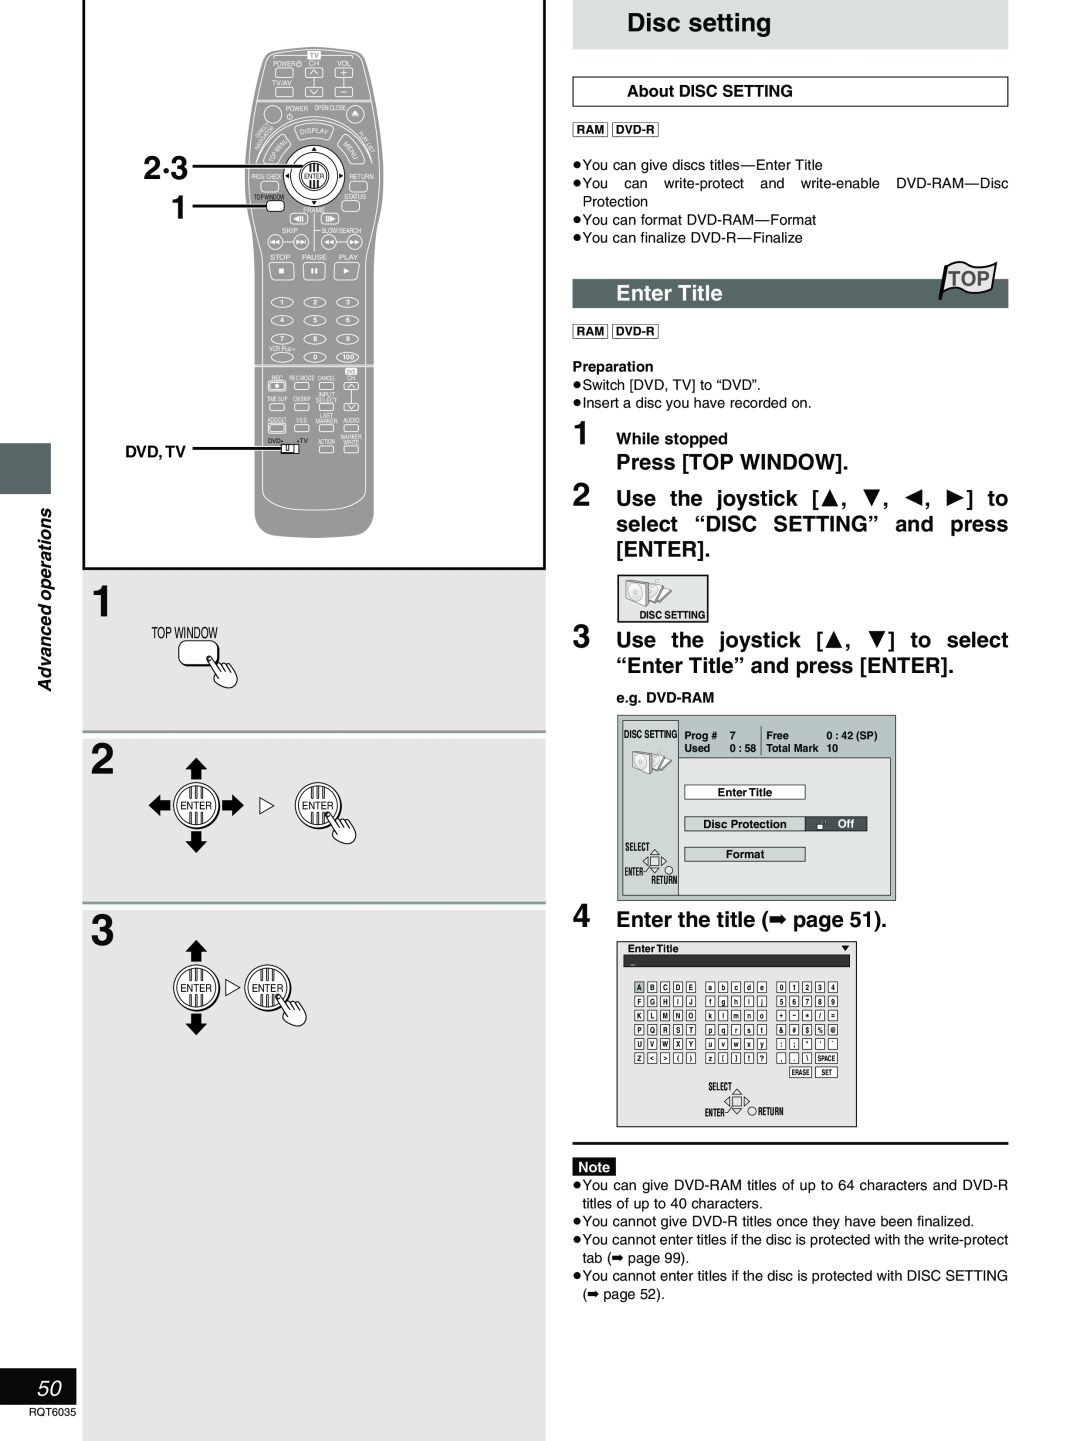 Panasonic DMR-E20 Disc setting, Use the joystick 3, 4 to select “Enter Title” and press ENTER, Enter the title page 